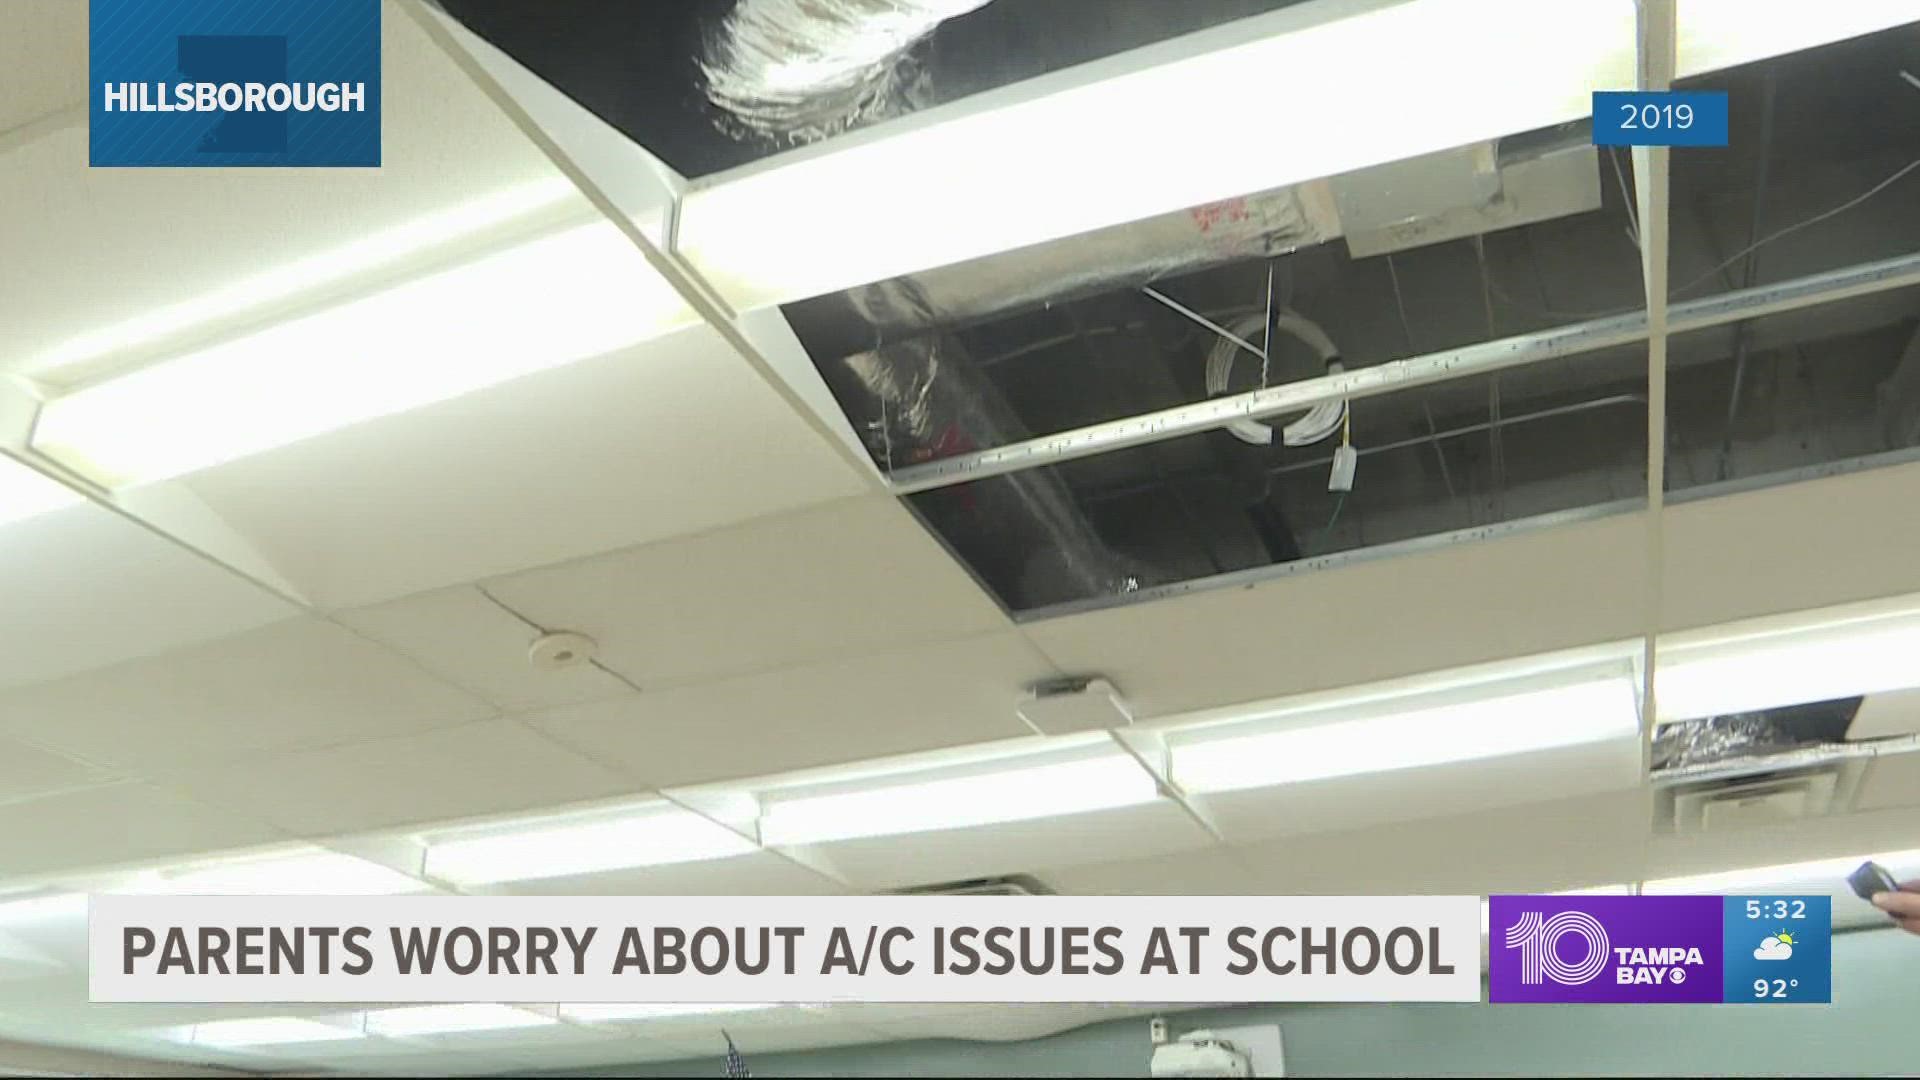 Marquetta Wilson says she was hoping the air conditioner at her son's school would be fixed over the summer.